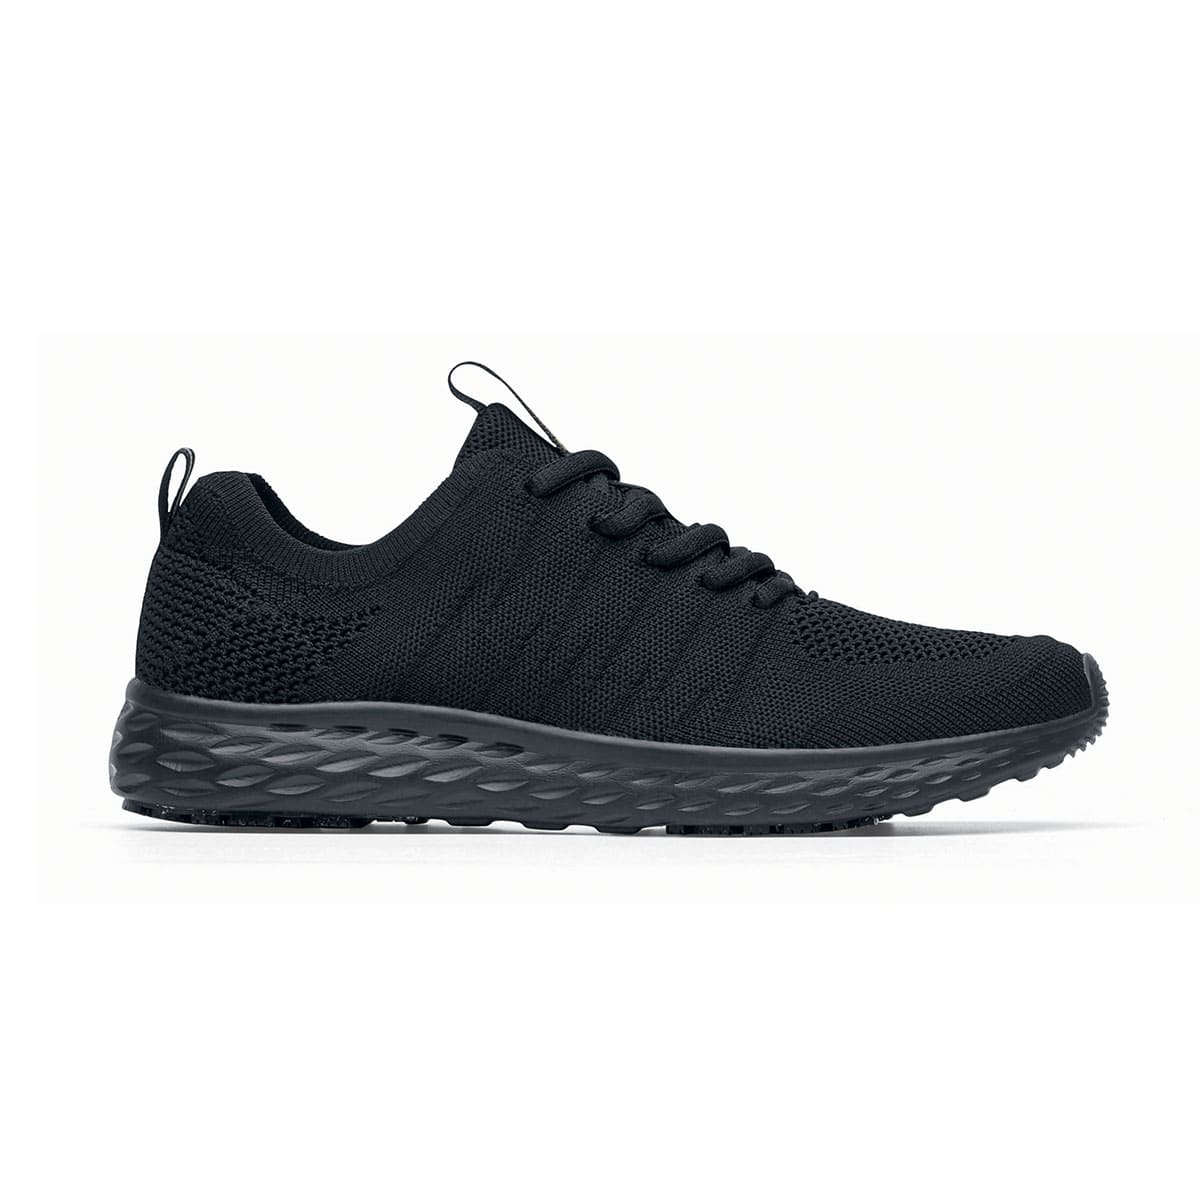 The Everlight™ Eco Men's Black from Shoes For Crews are slip-resistant trainers built with a recycled mesh upper that is water-resistant and breathable. Designed to keep your feet cool and ventilated, seen from the right.